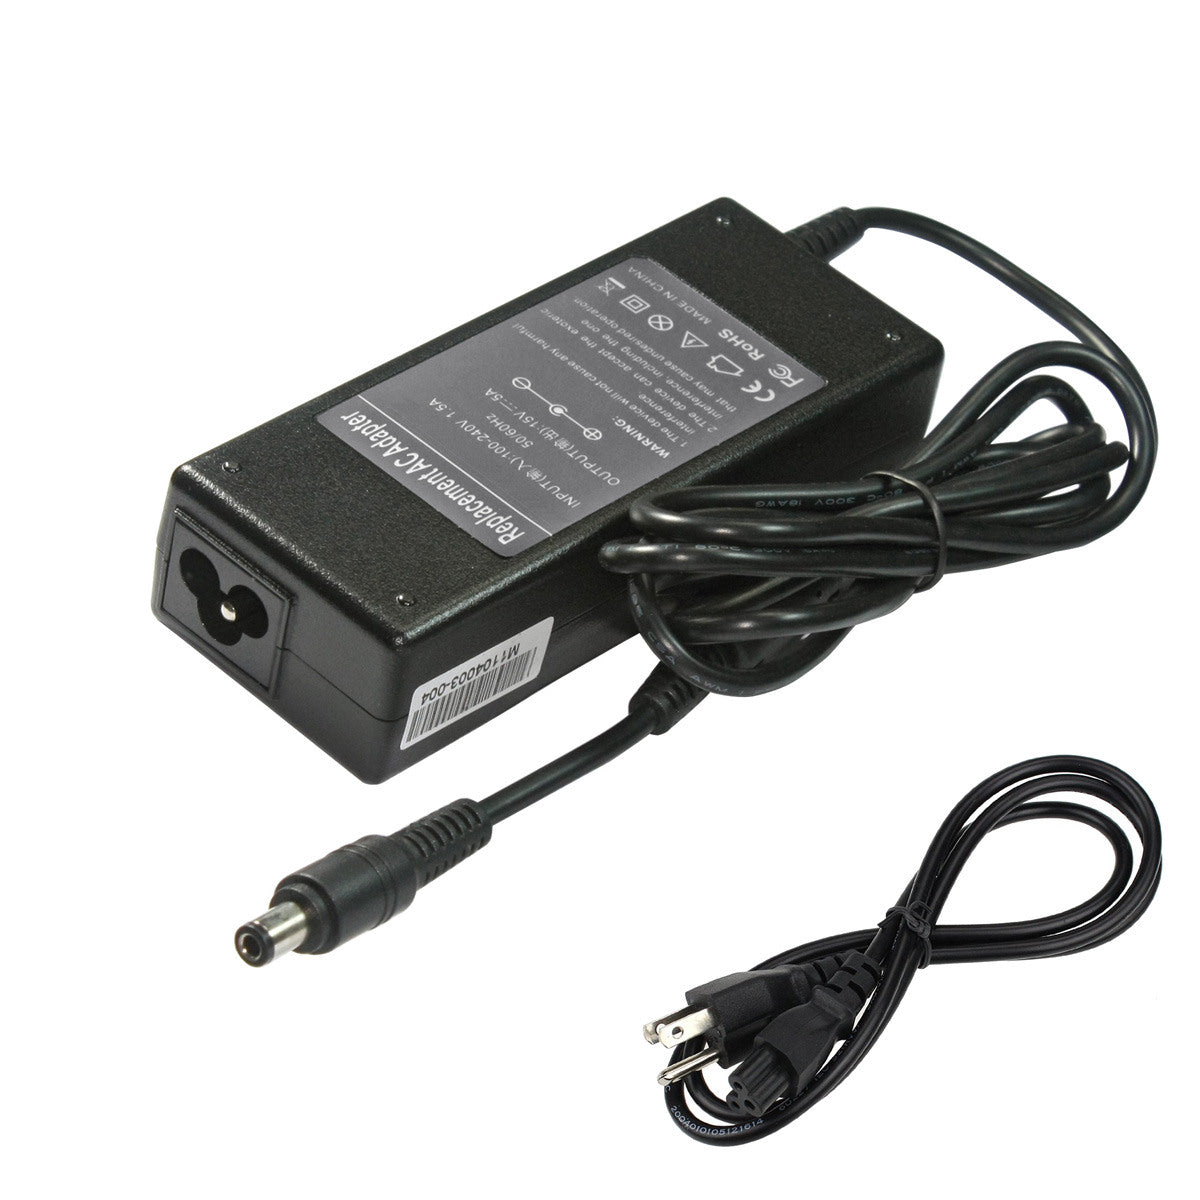 Compatible Replacement Toshiba Satellite M55-S300 AC Adapter 75Watt 15V 5A.